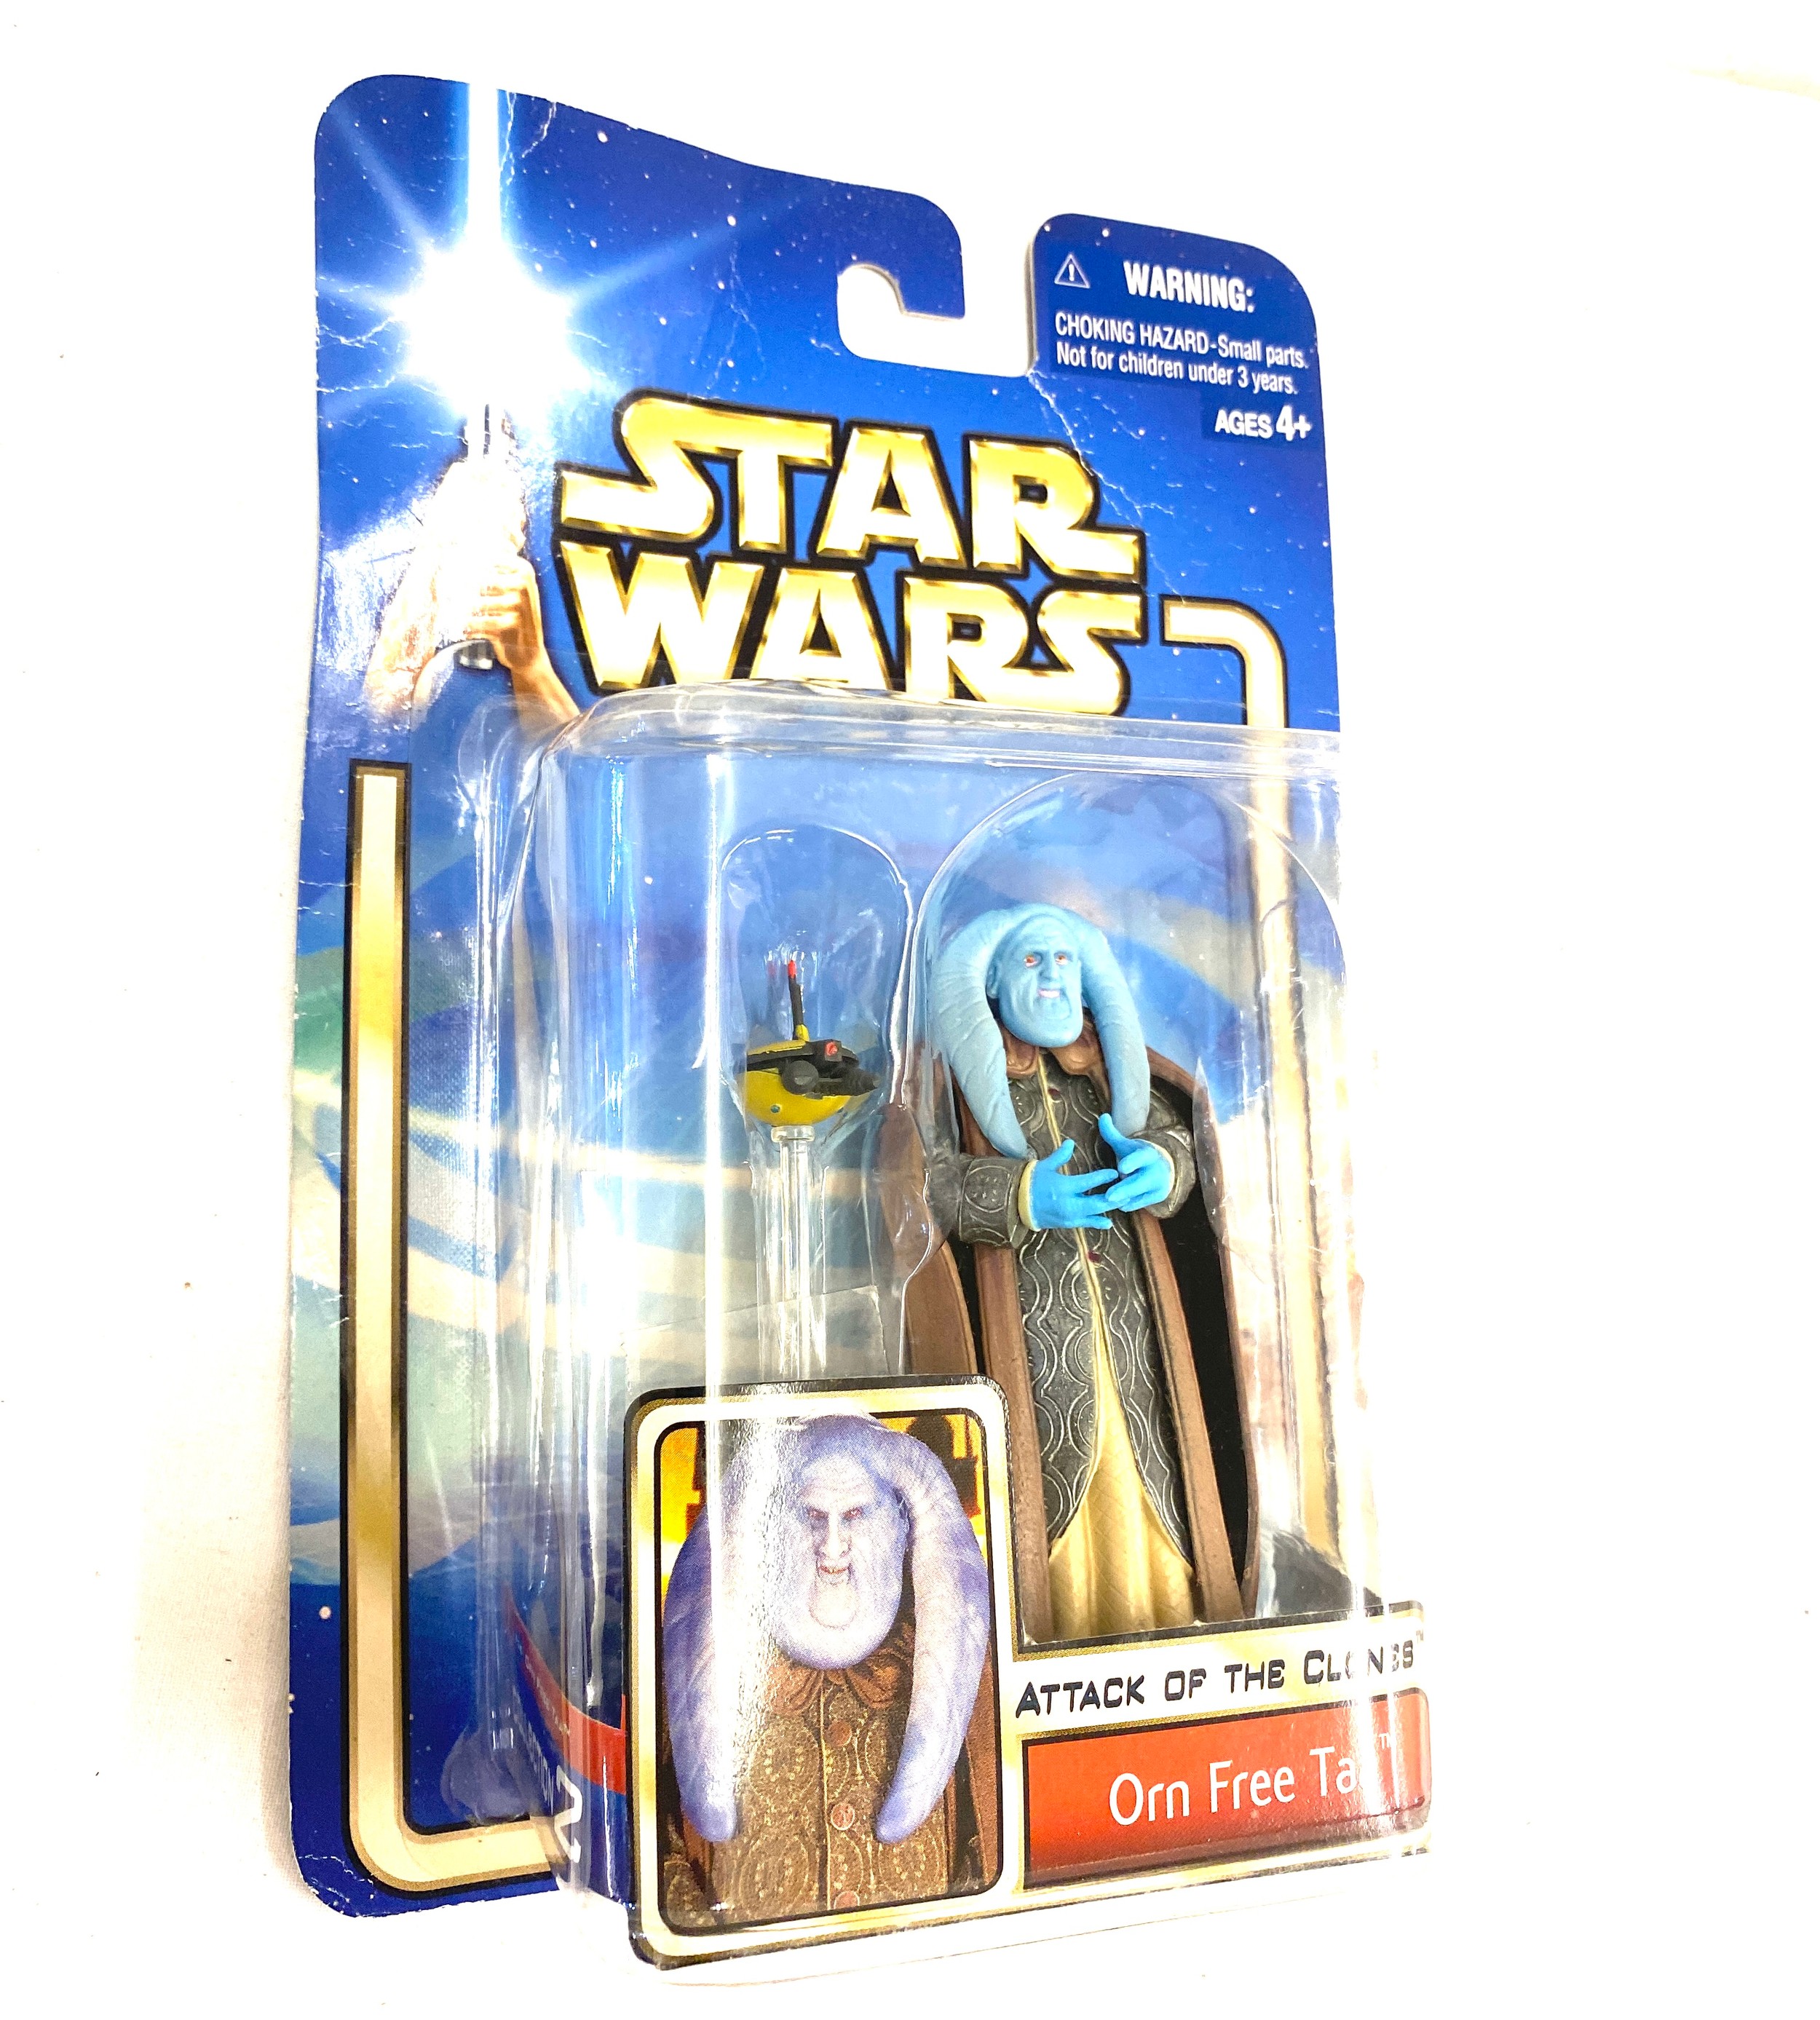 Hasbro boxed Star Wars to include Jango Fett, Orn Free Taa, Power of the Jedi, Tomy Star Wars - Image 4 of 7